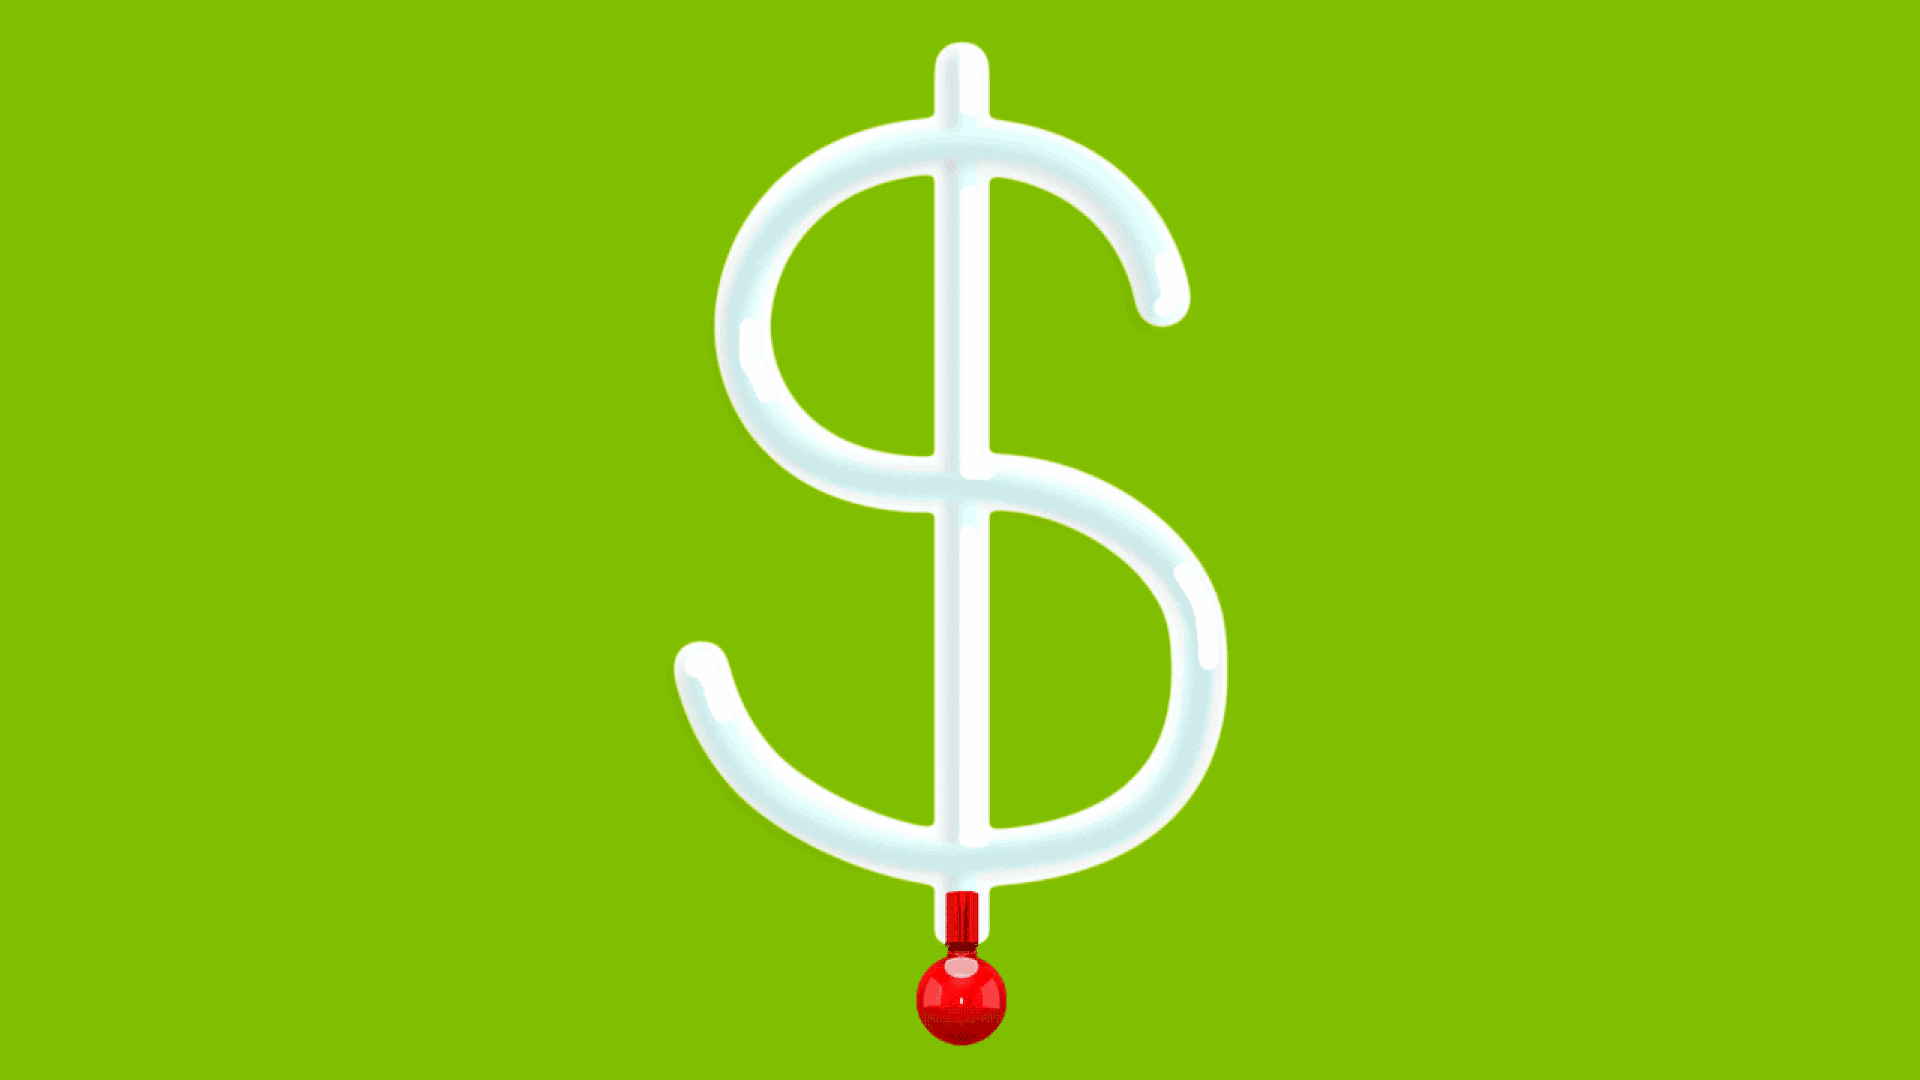 GIF of a dollar sign filling with red.